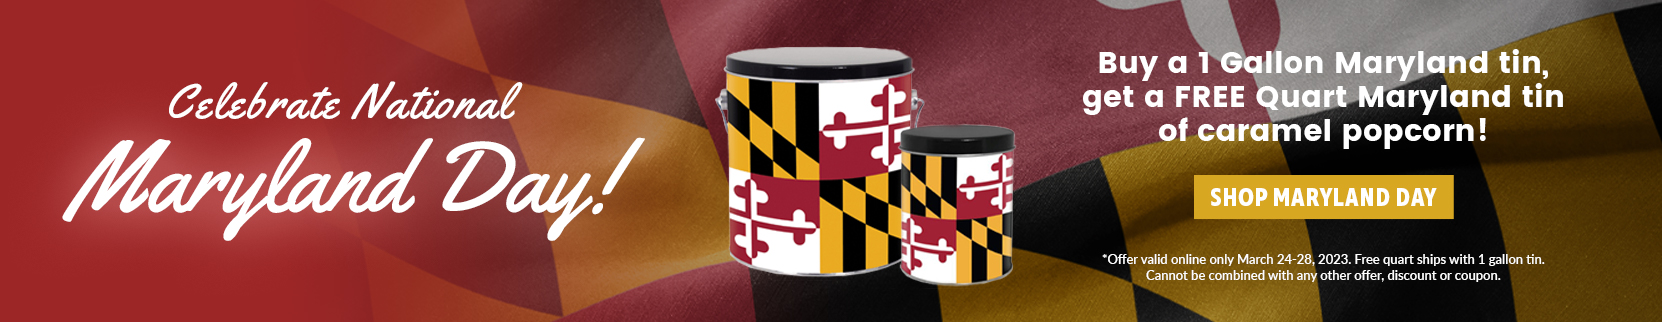 national maryland day graphic/promo